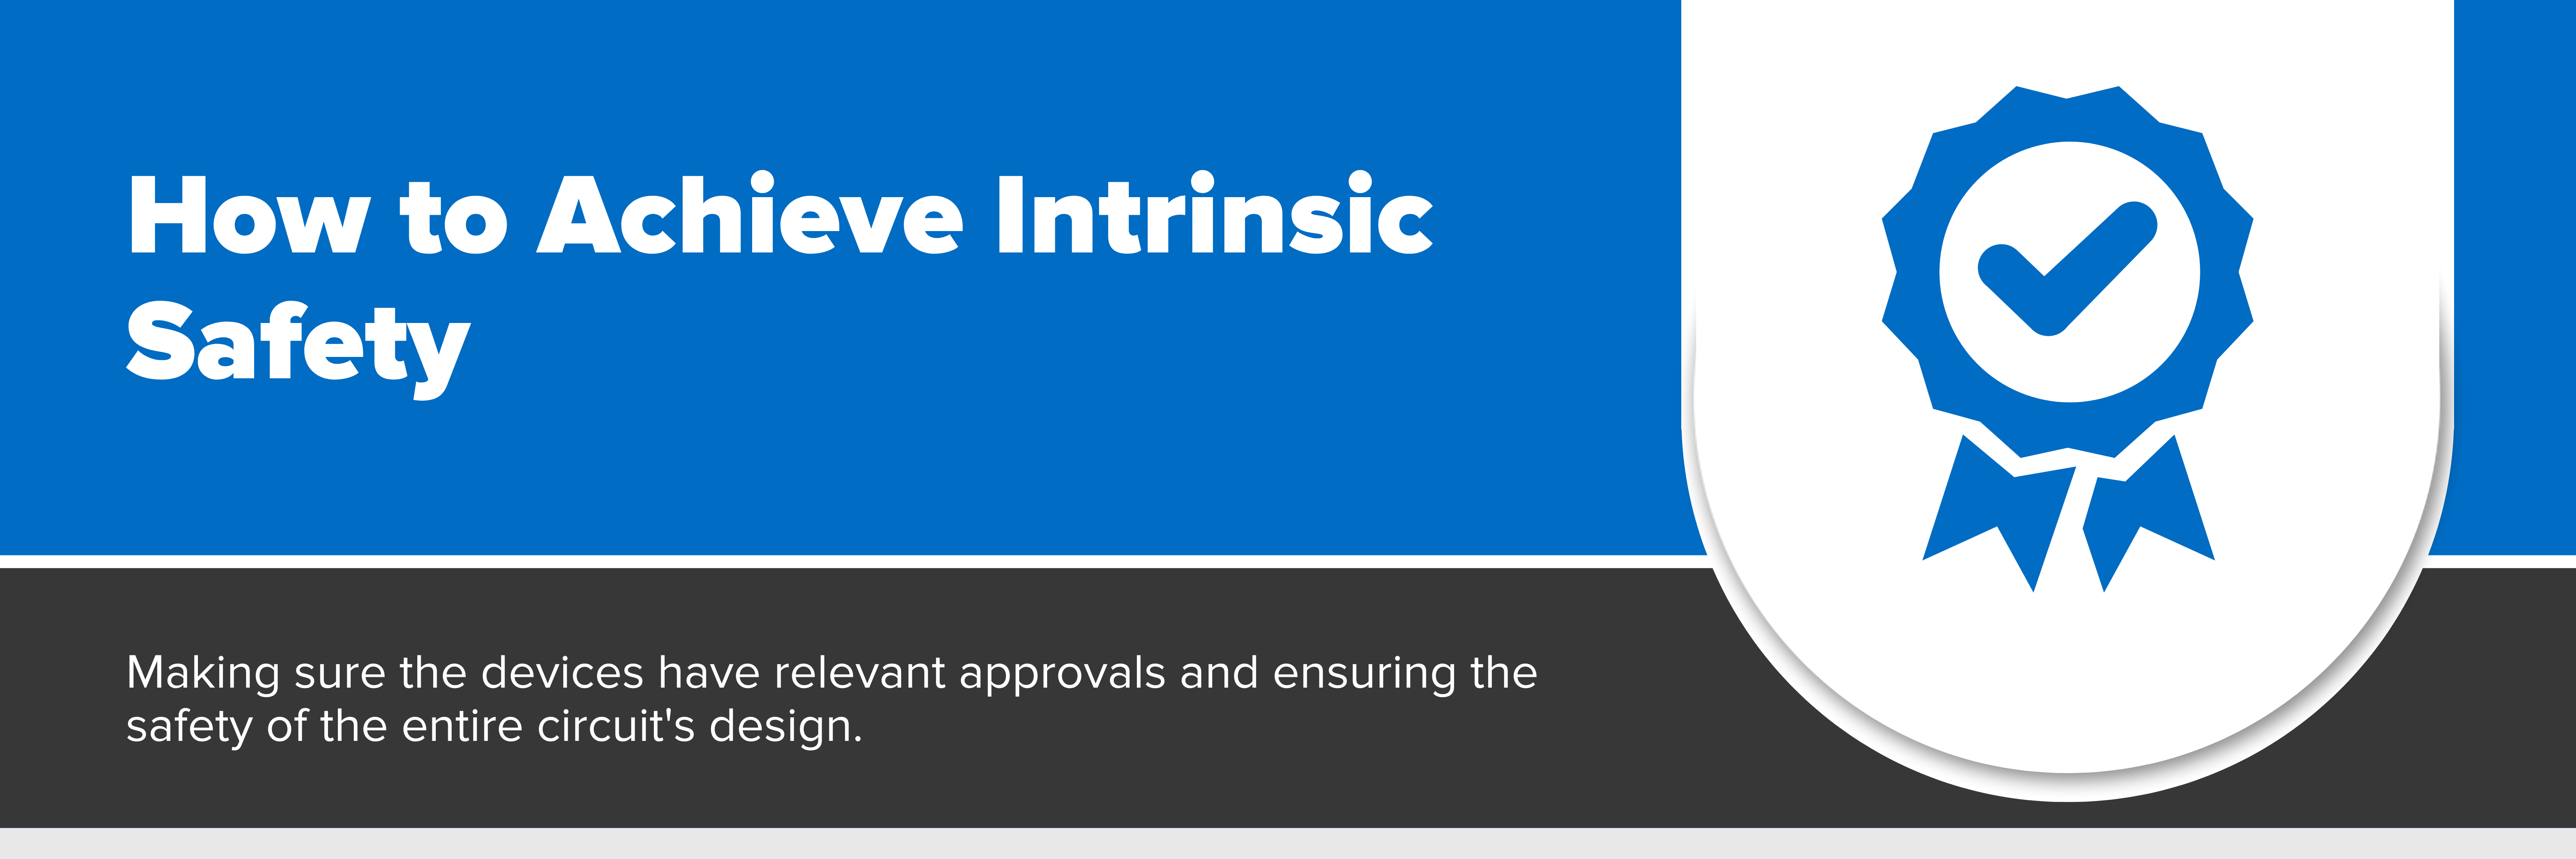 Header image with text "How to Achieve Intrinsic Safety"